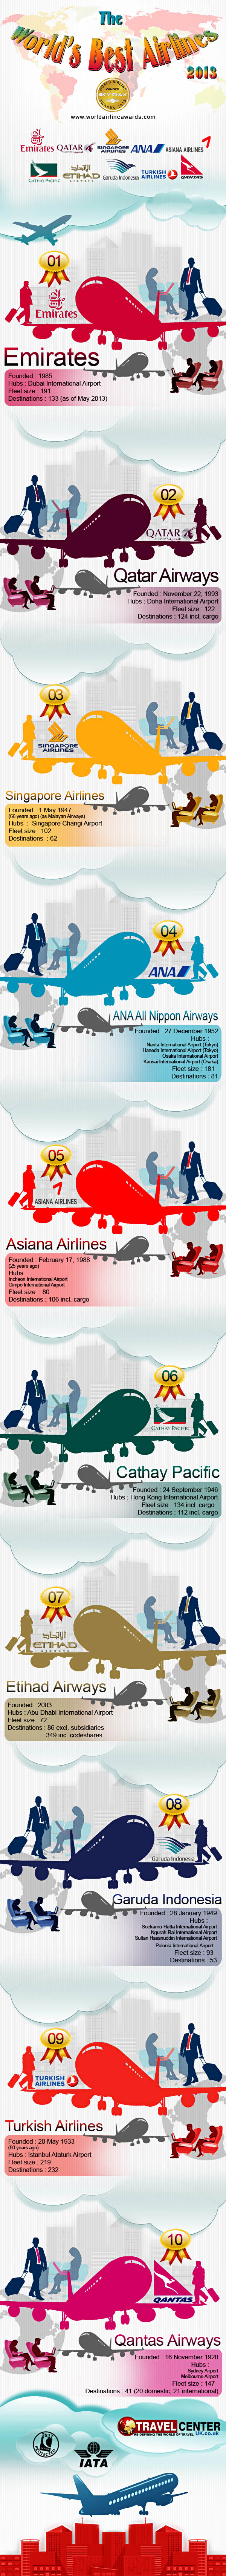 Best Airlines 2013